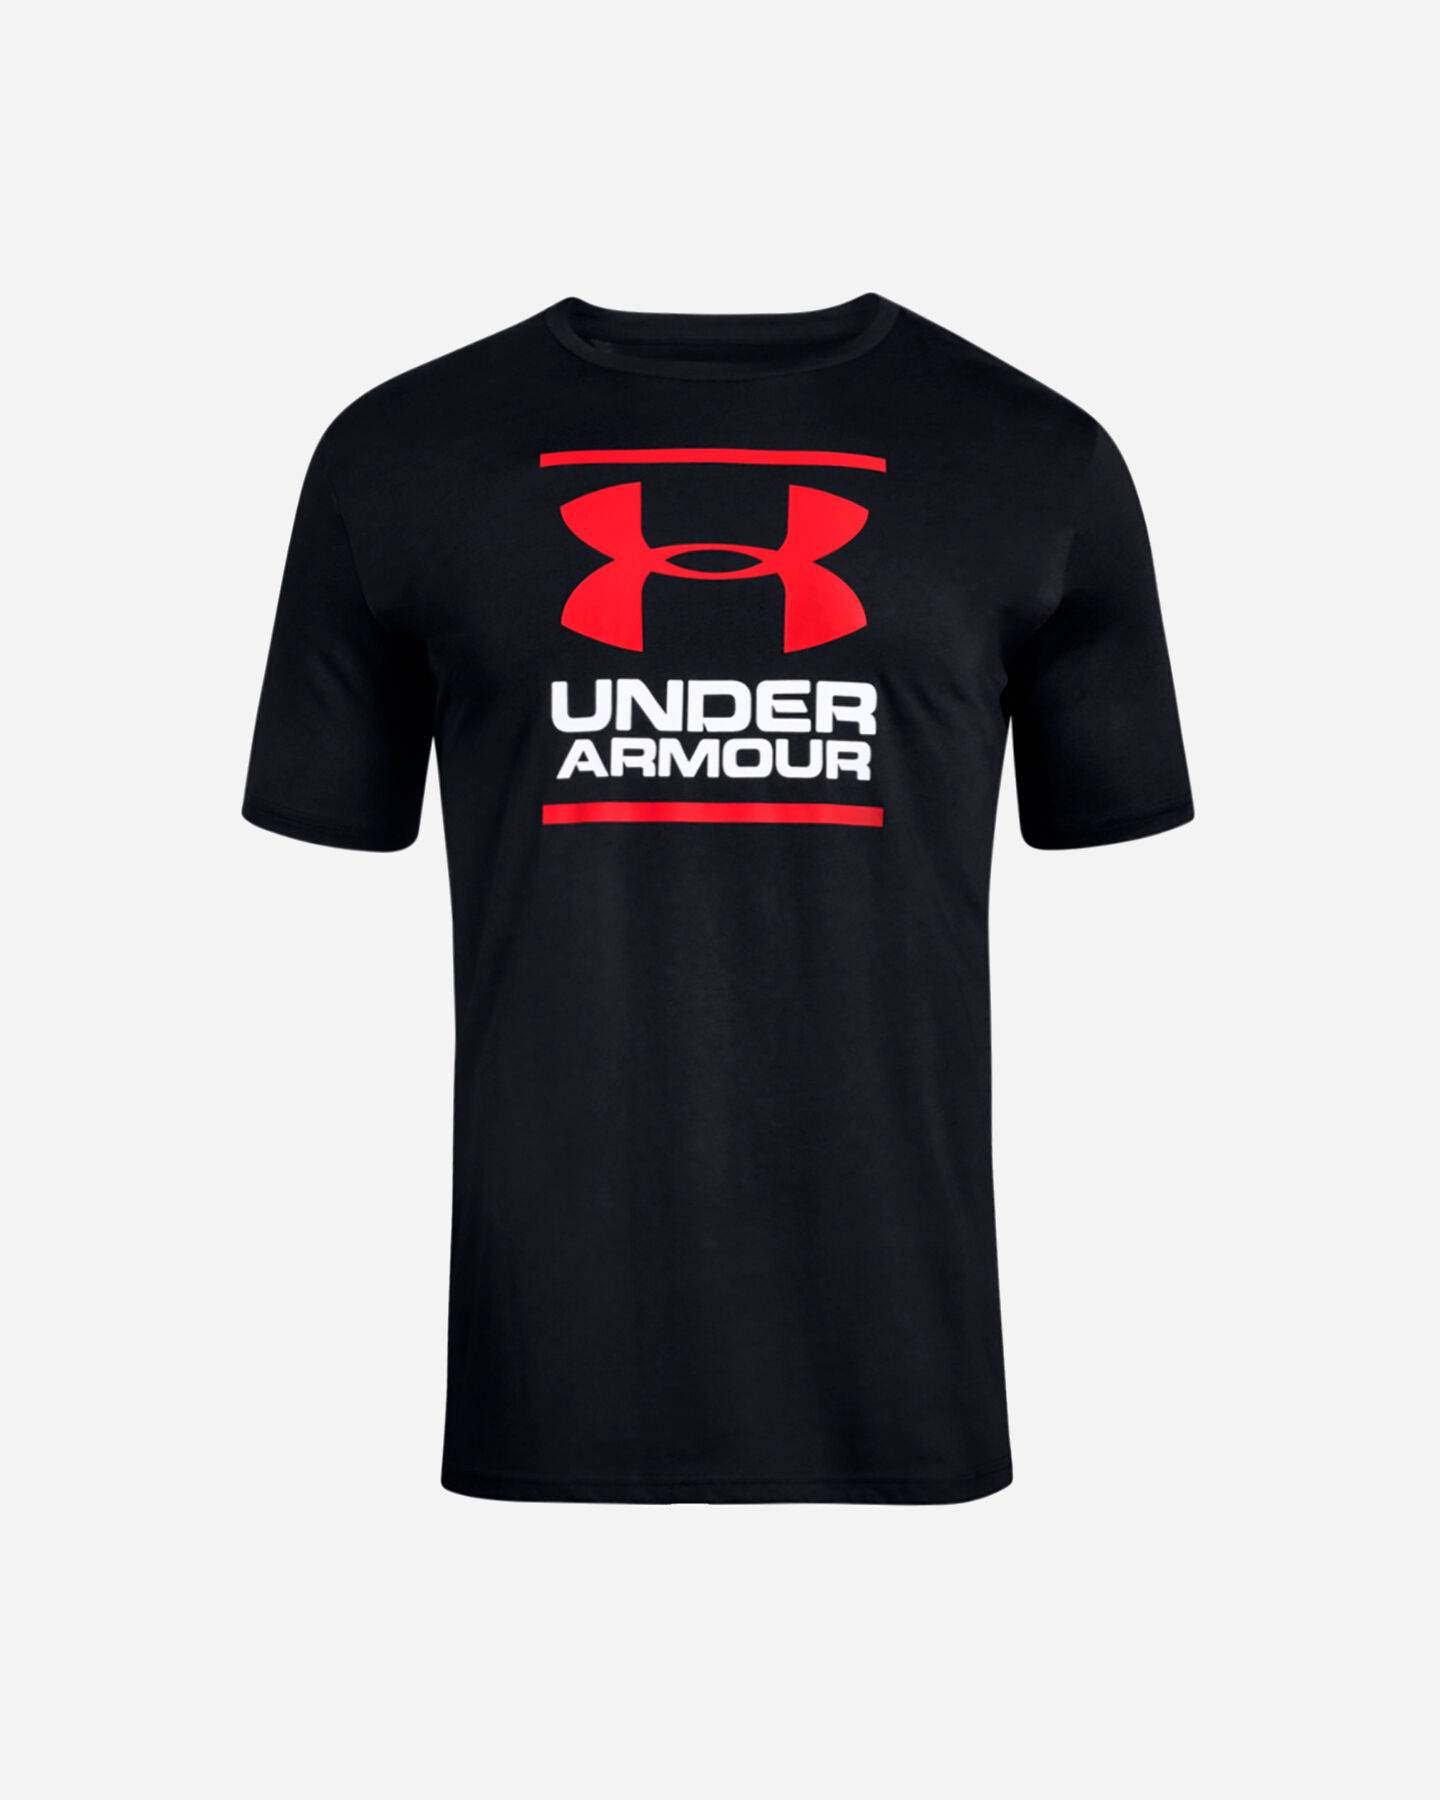  T-Shirt training UNDER ARMOUR FOUNDATION SS M S2025362|0001|SM scatto 0